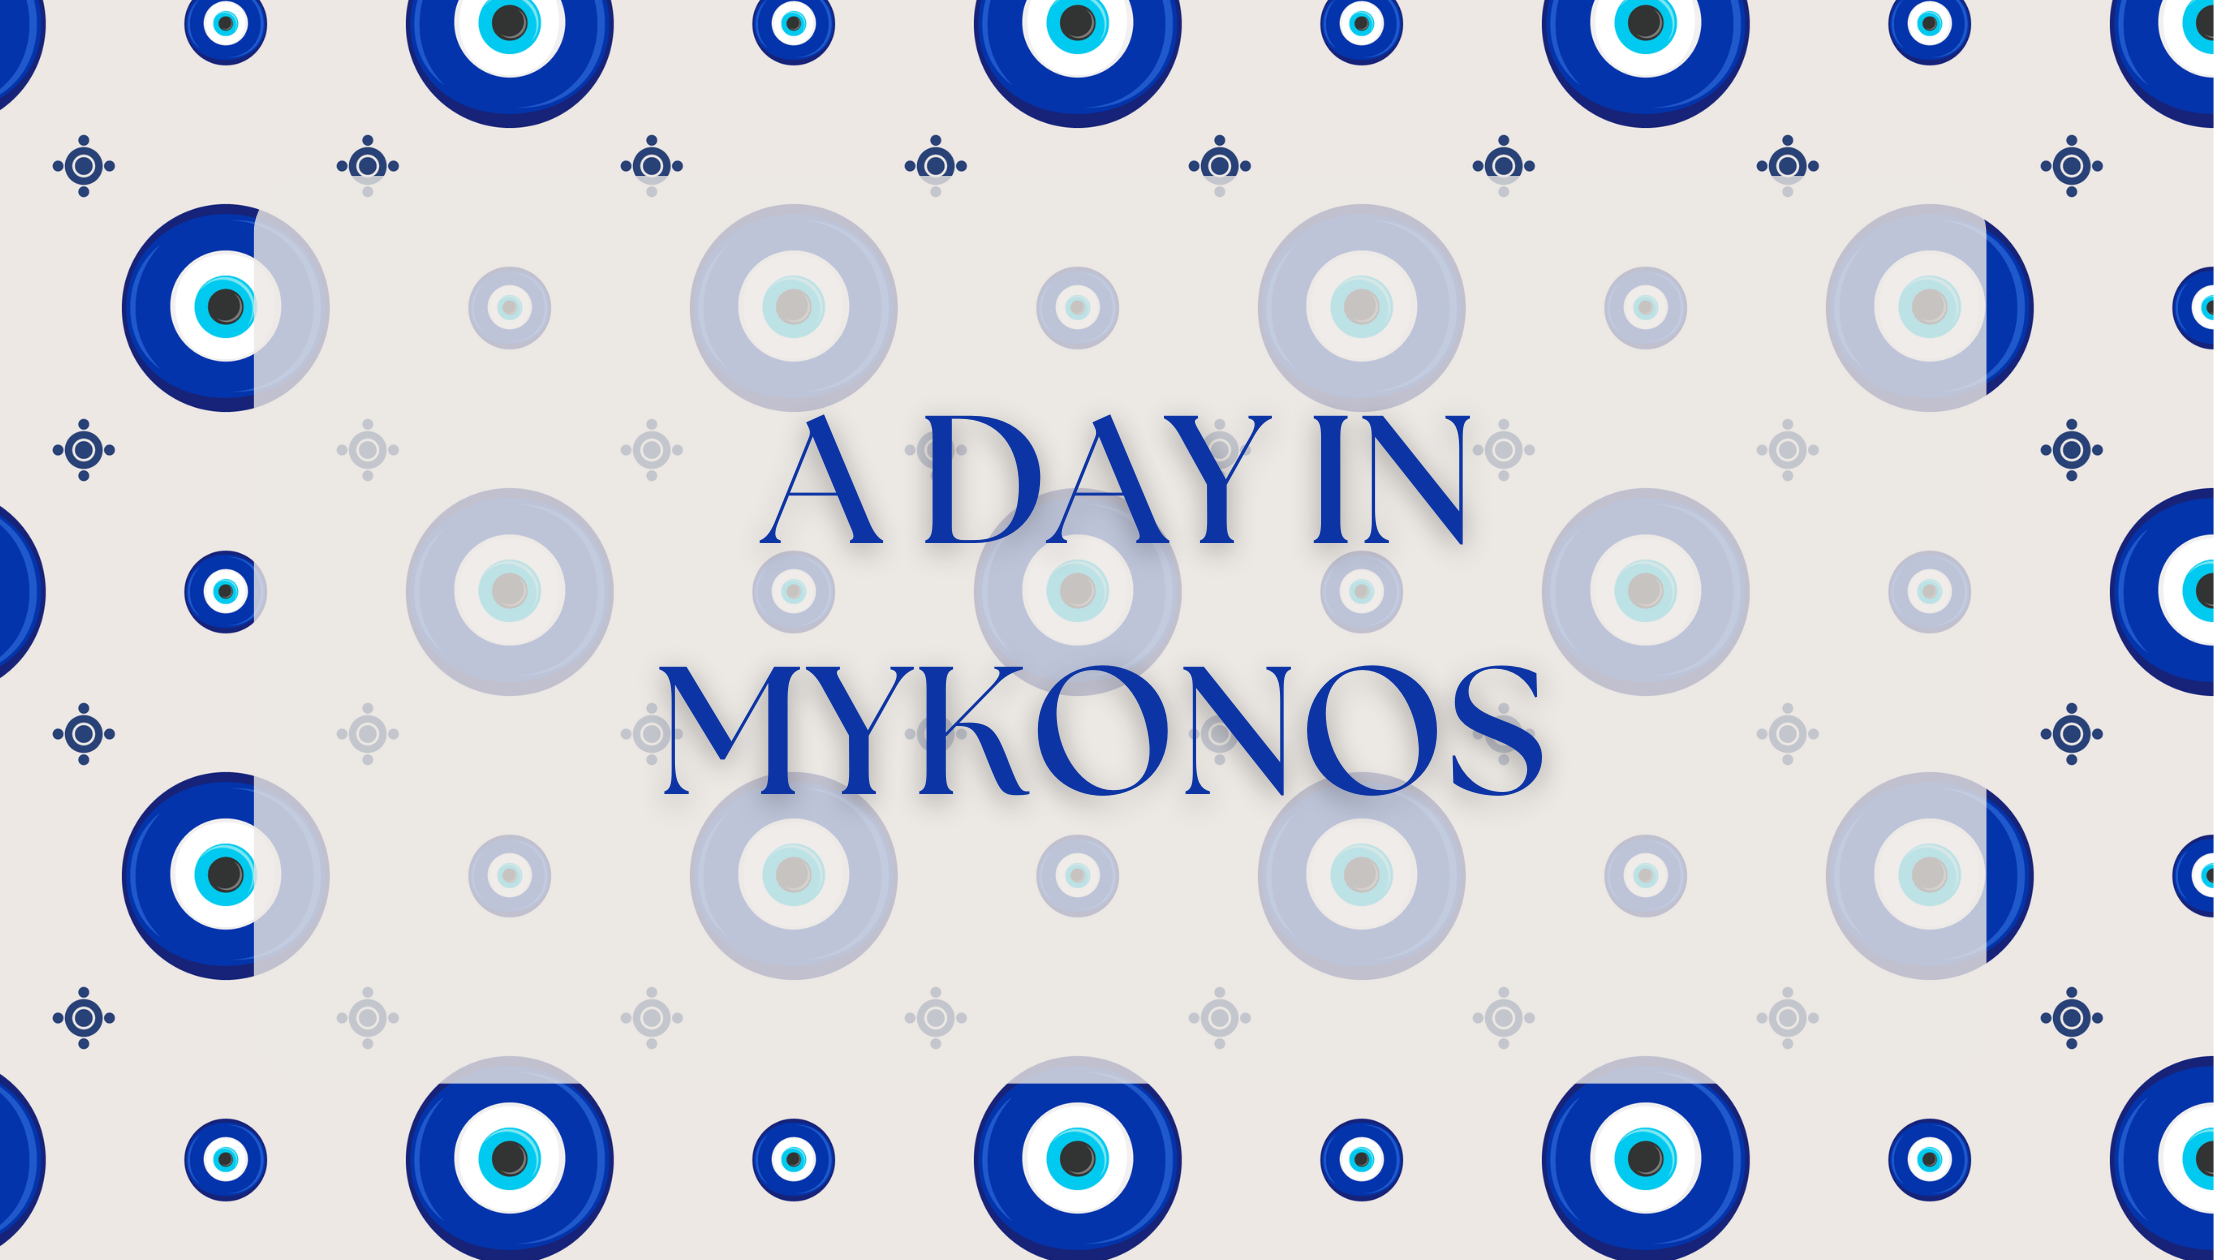 A Day in Mykonos with Disney Cruise Line